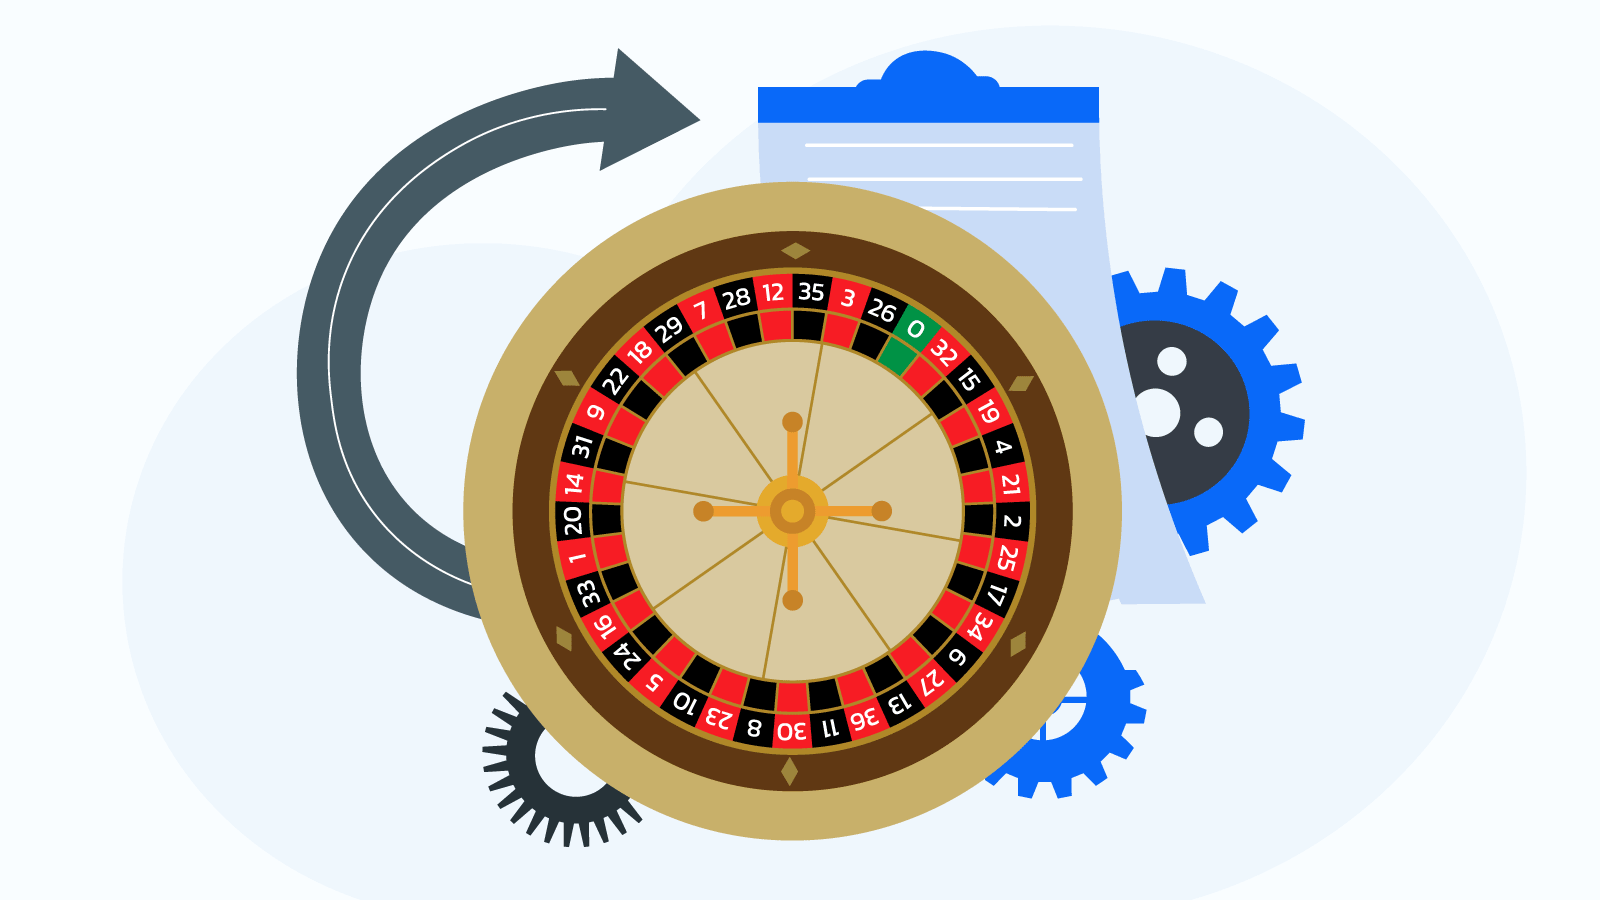 The origin of the Roulette wheel numbers